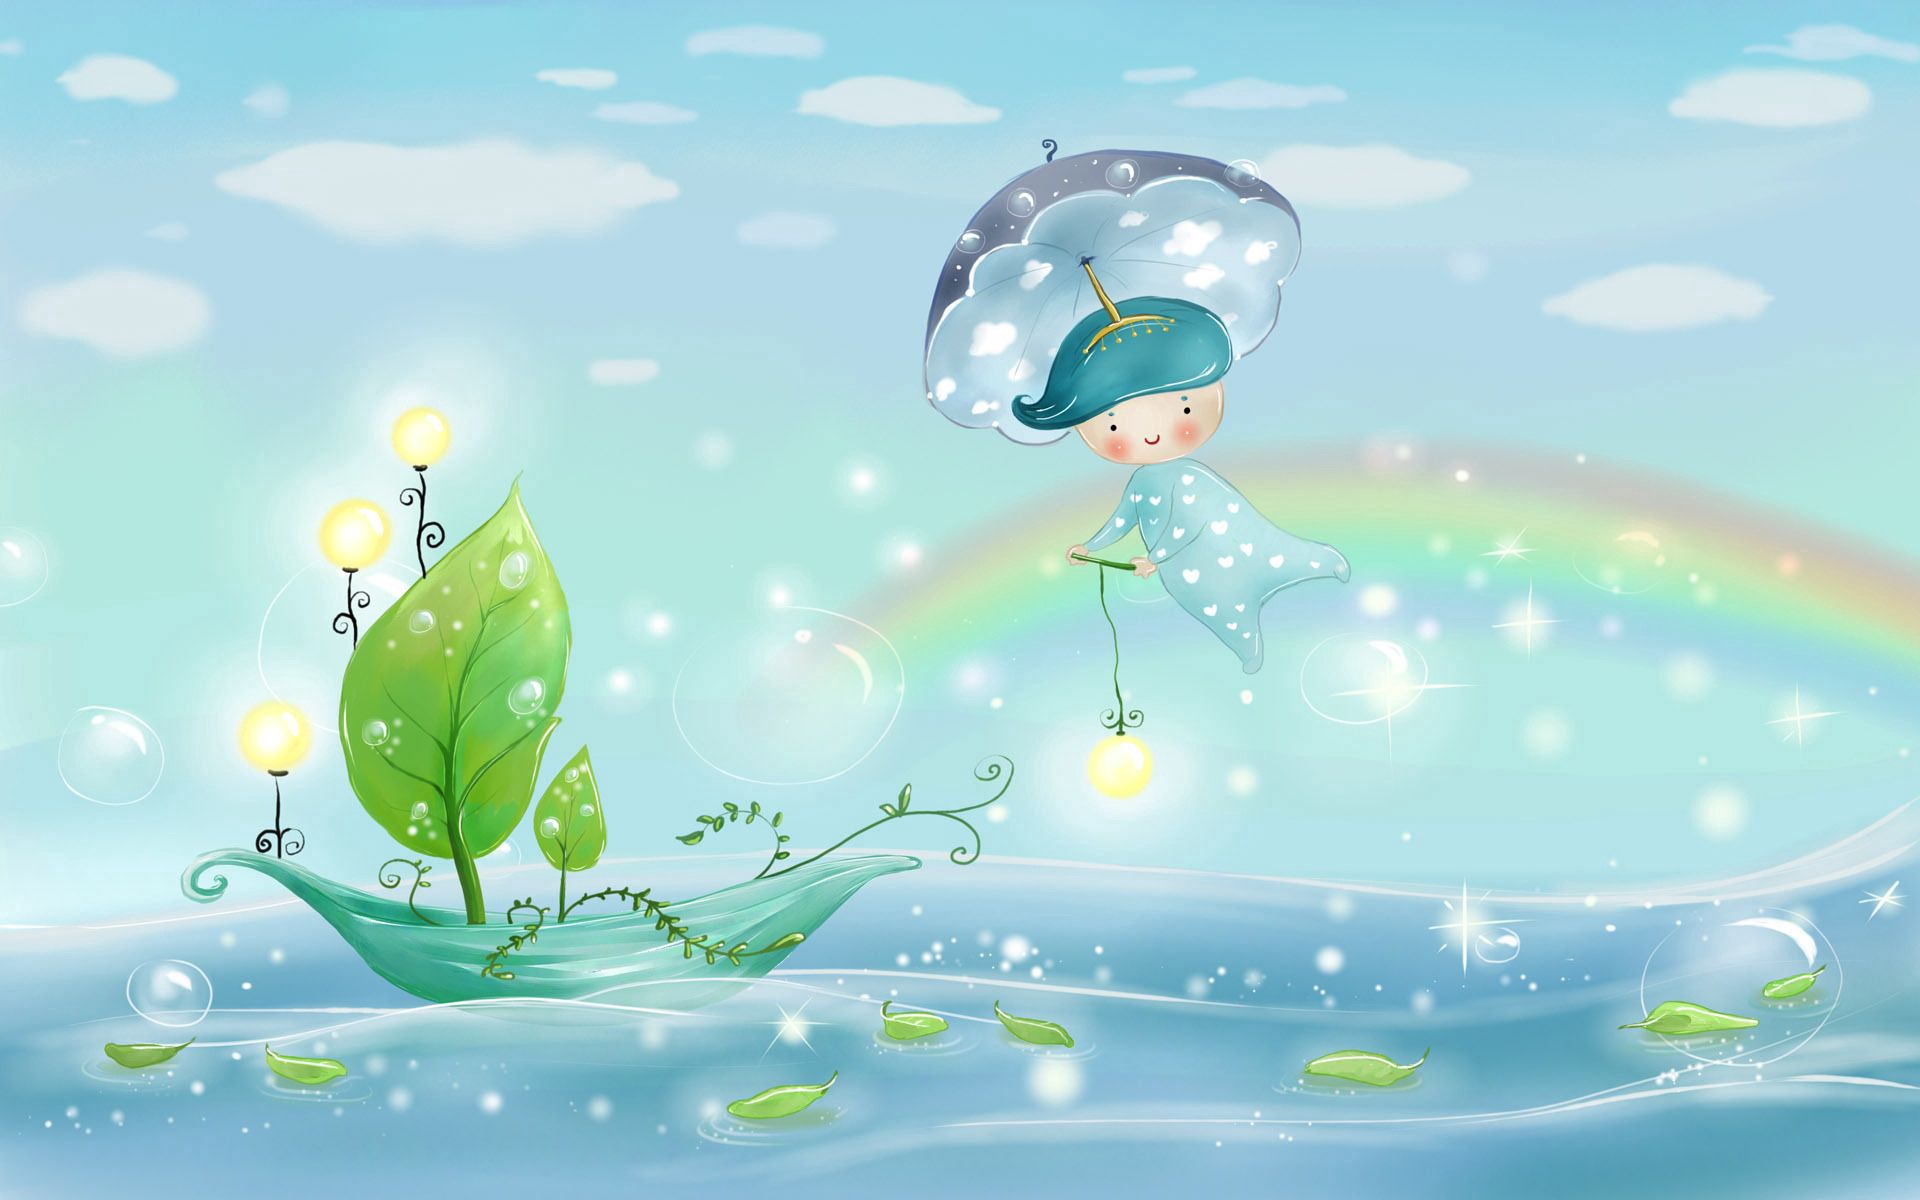 leaves, sail, picture, drawing, sea, boat, nature, water, sky, rain, bubbles, clouds, rainbow, vector, lights, shine, light, lanterns, umbrella, boy, weather